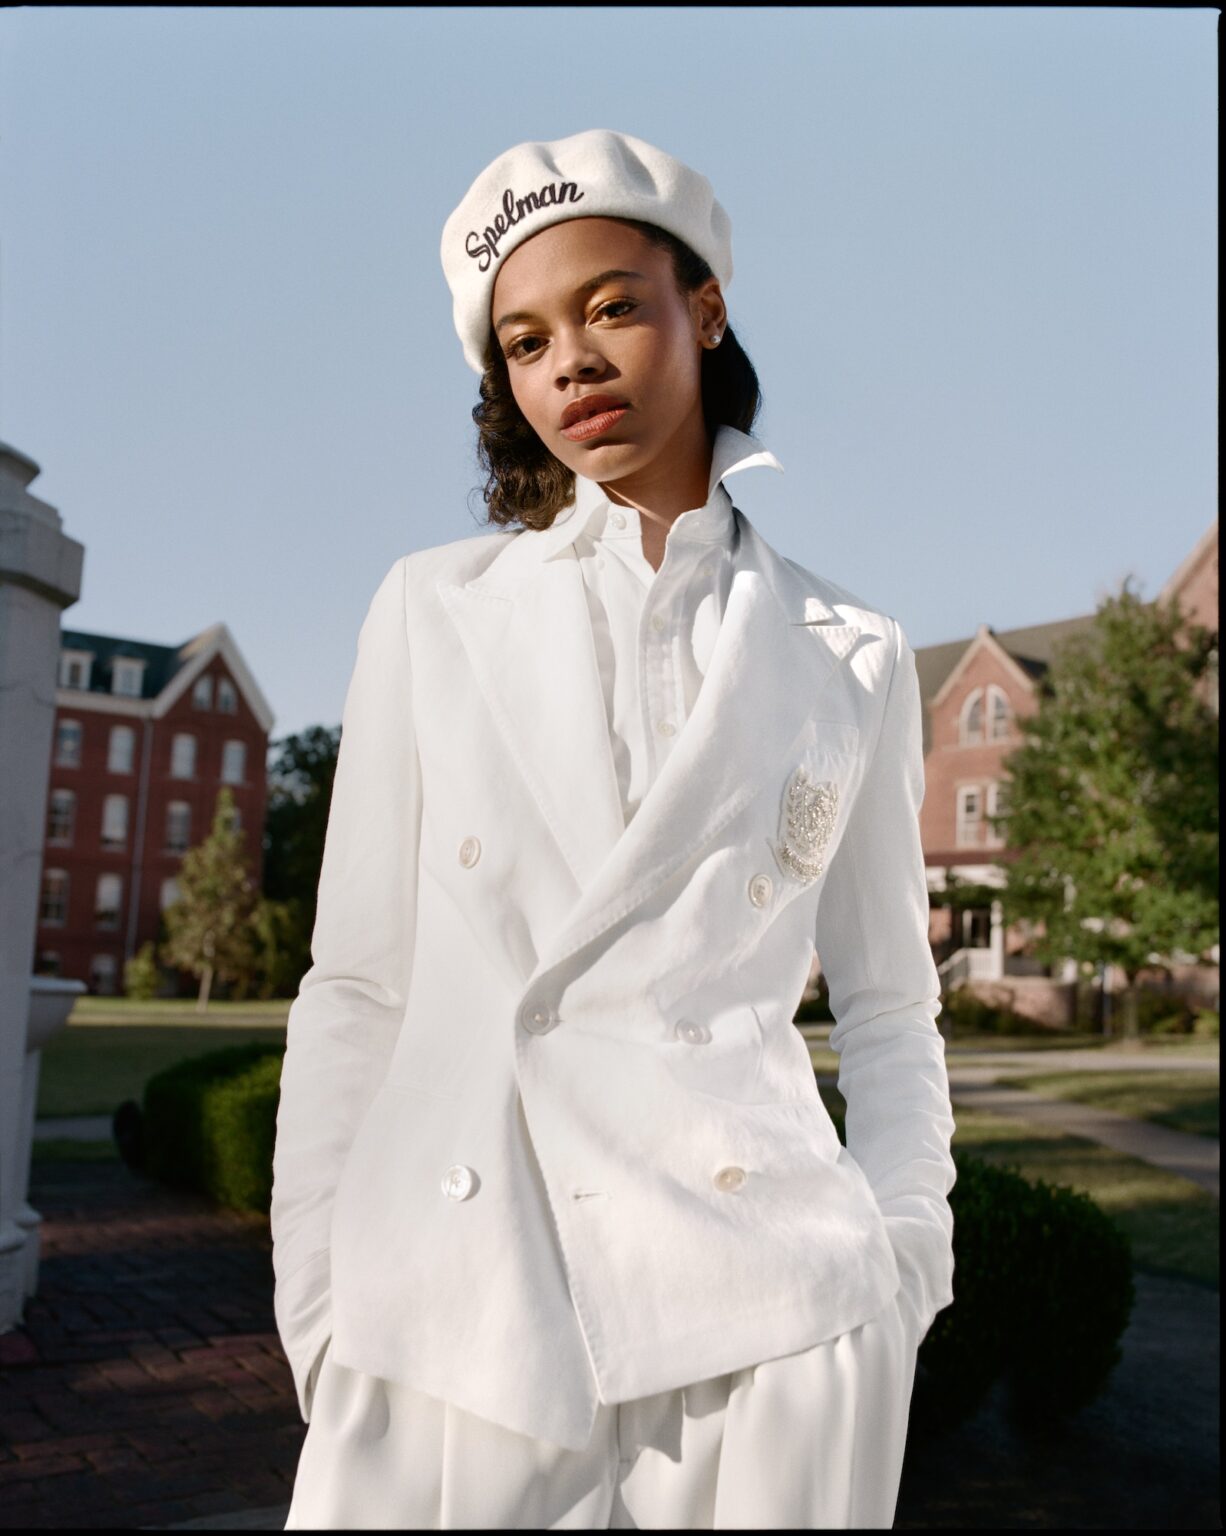 Ralph Lauren honors black people in new collection - 3